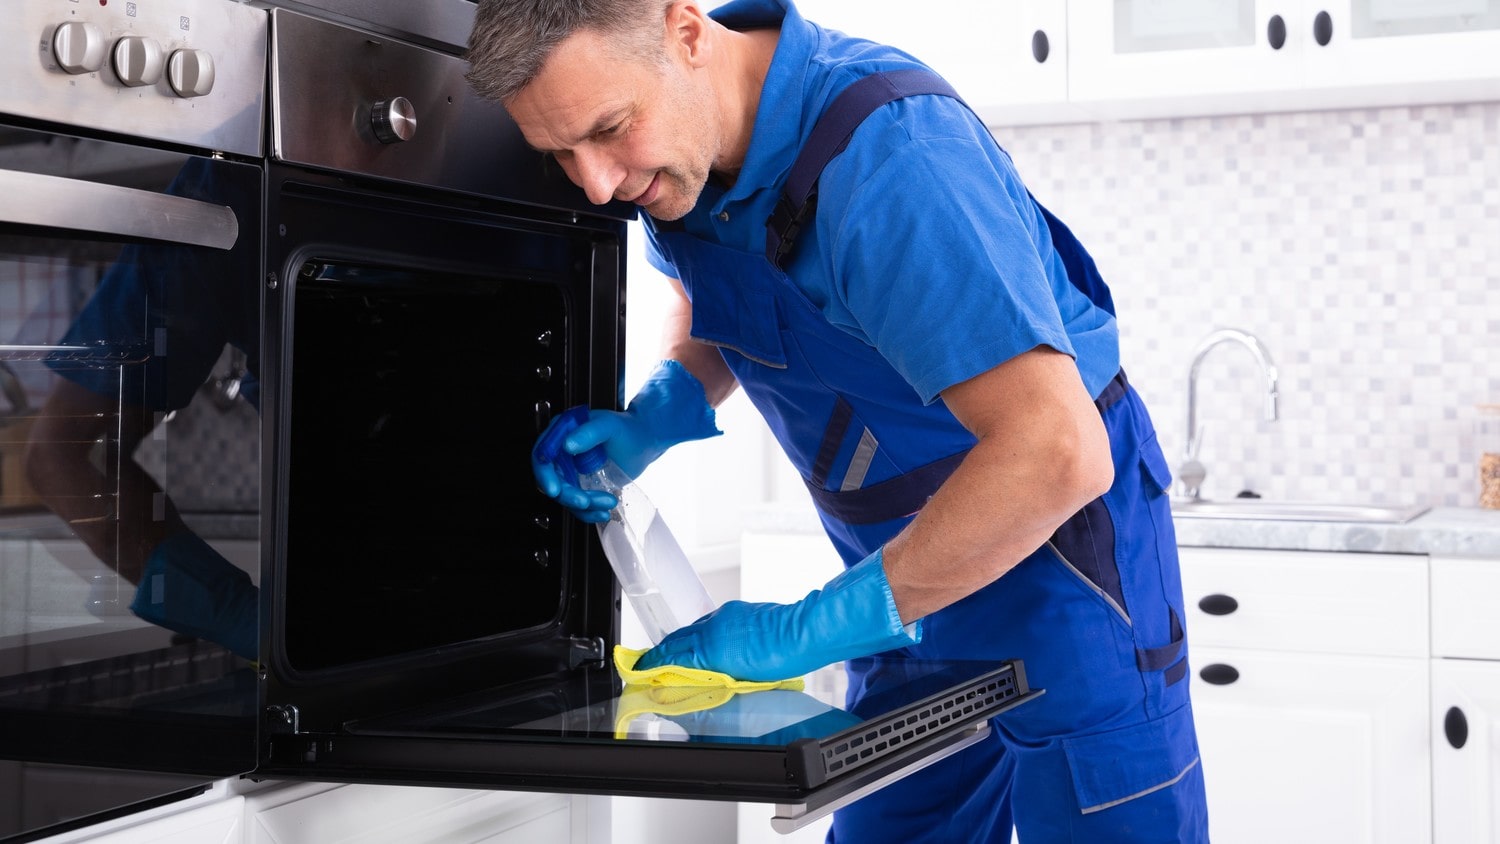 A person wearing rubber gloves and ajumbsuite cleaning the inside of an oven in a brightly lit kitchen.